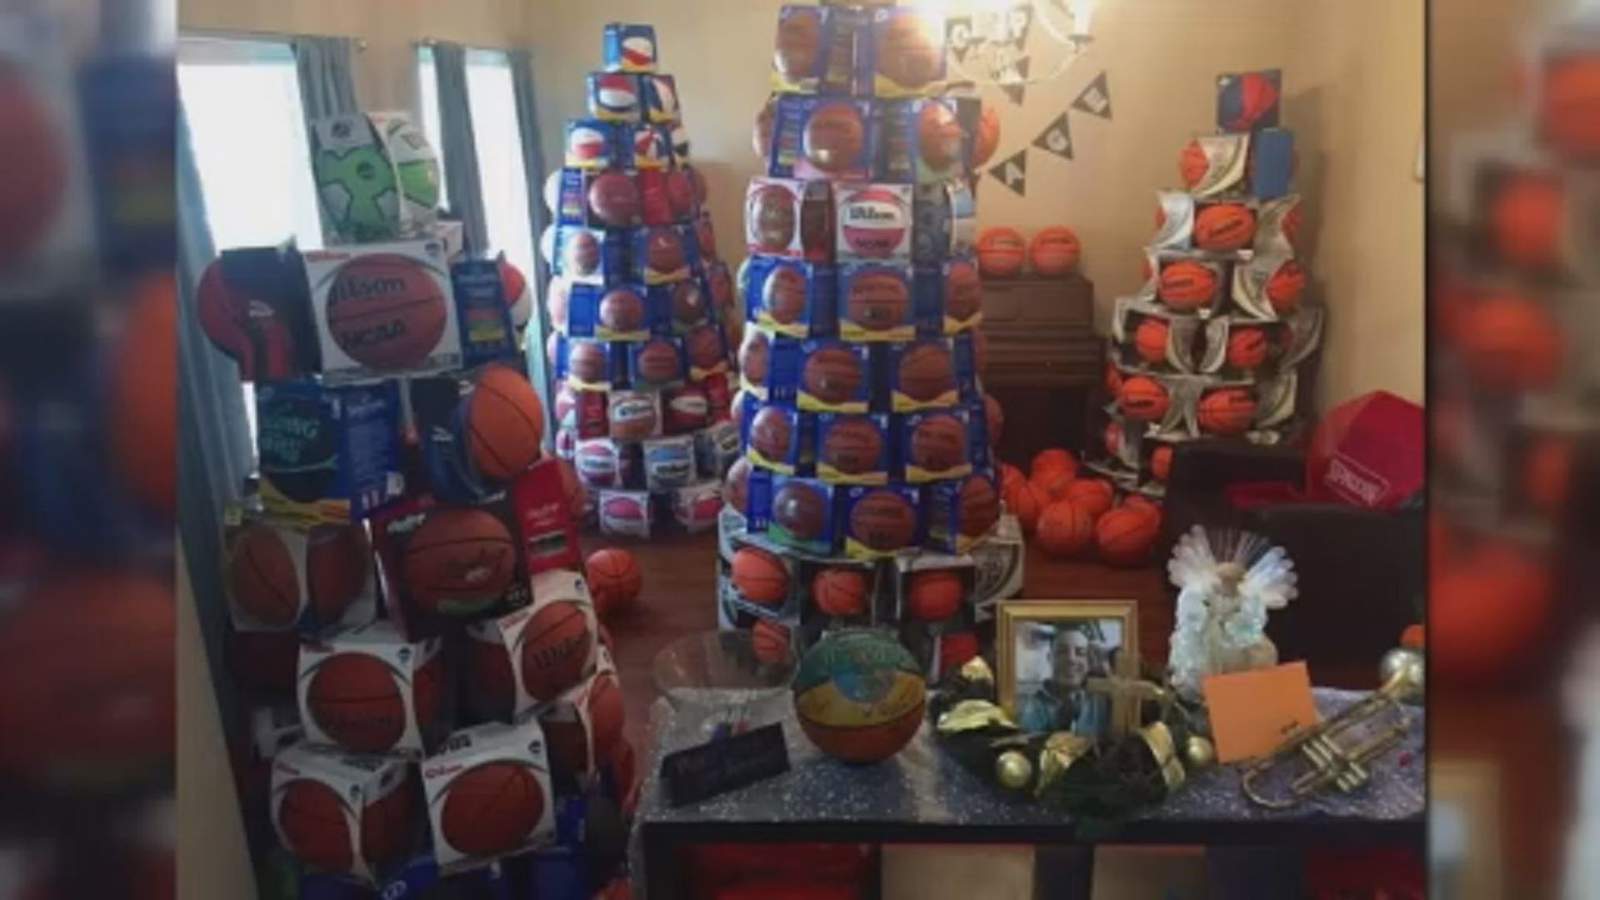 Baytown family donates hundreds of basketballs to Houston elementary school in honor of late son